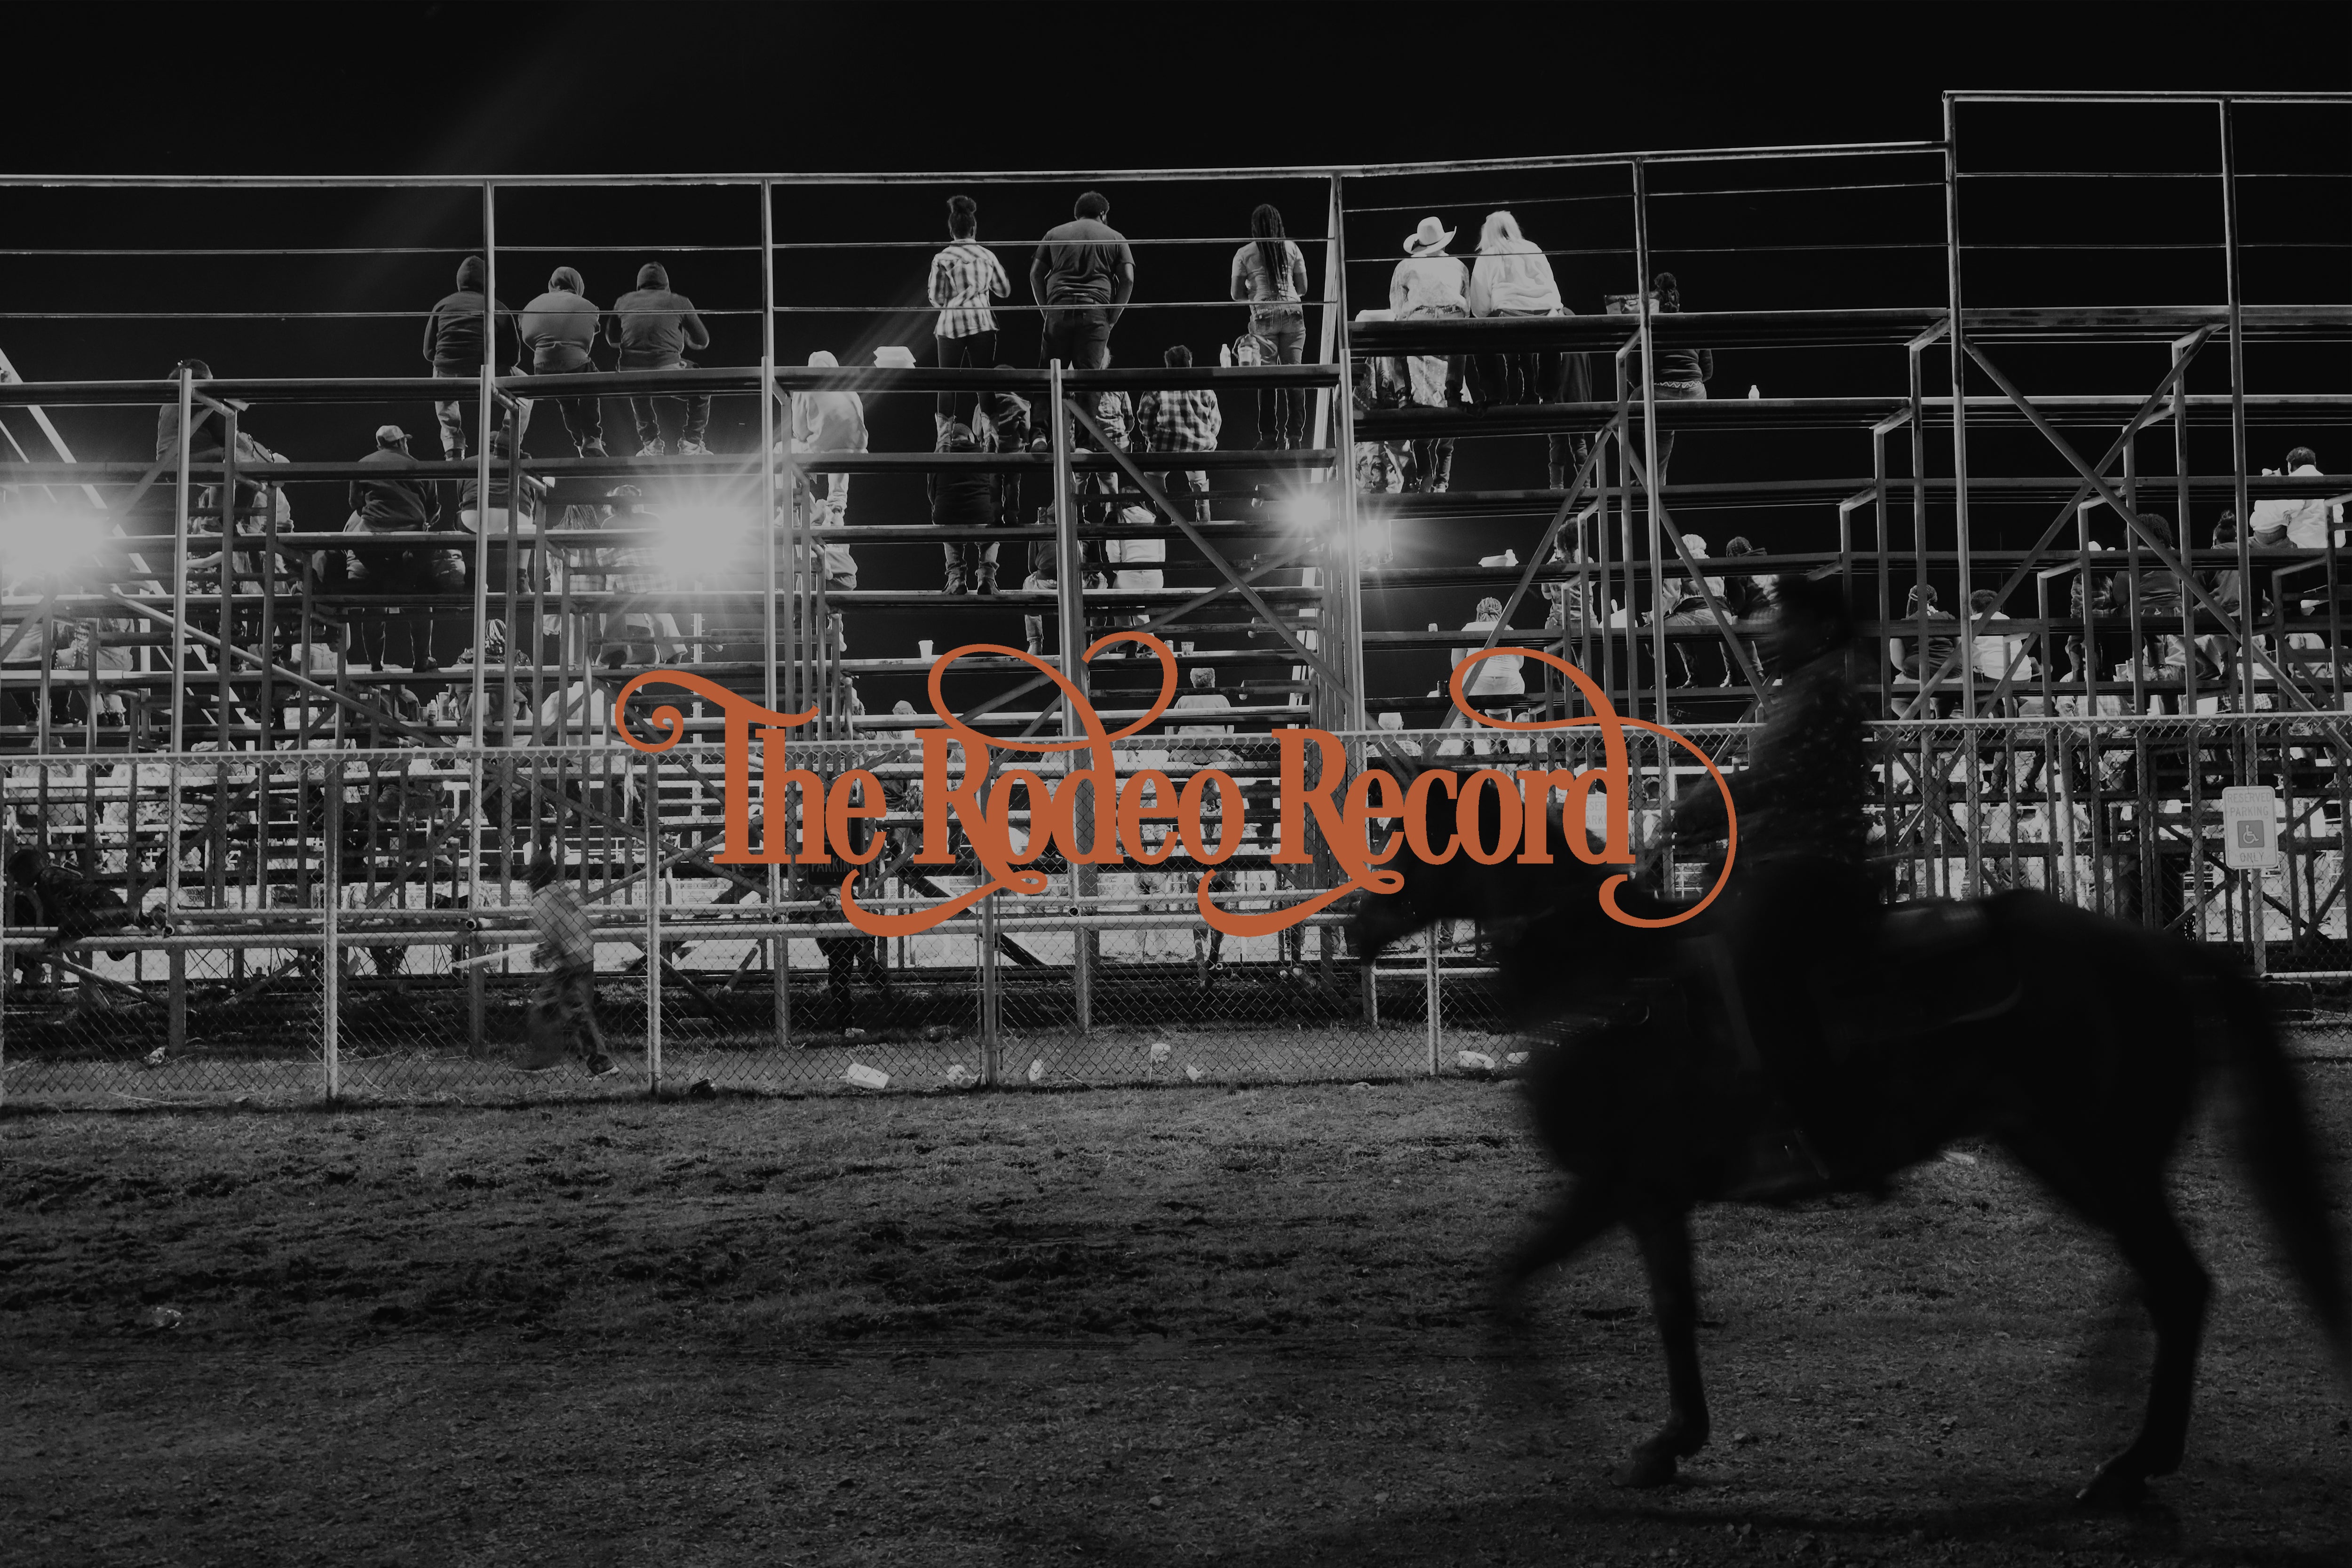 "The Rodeo Record" | A Photo Book by Jakian Parks